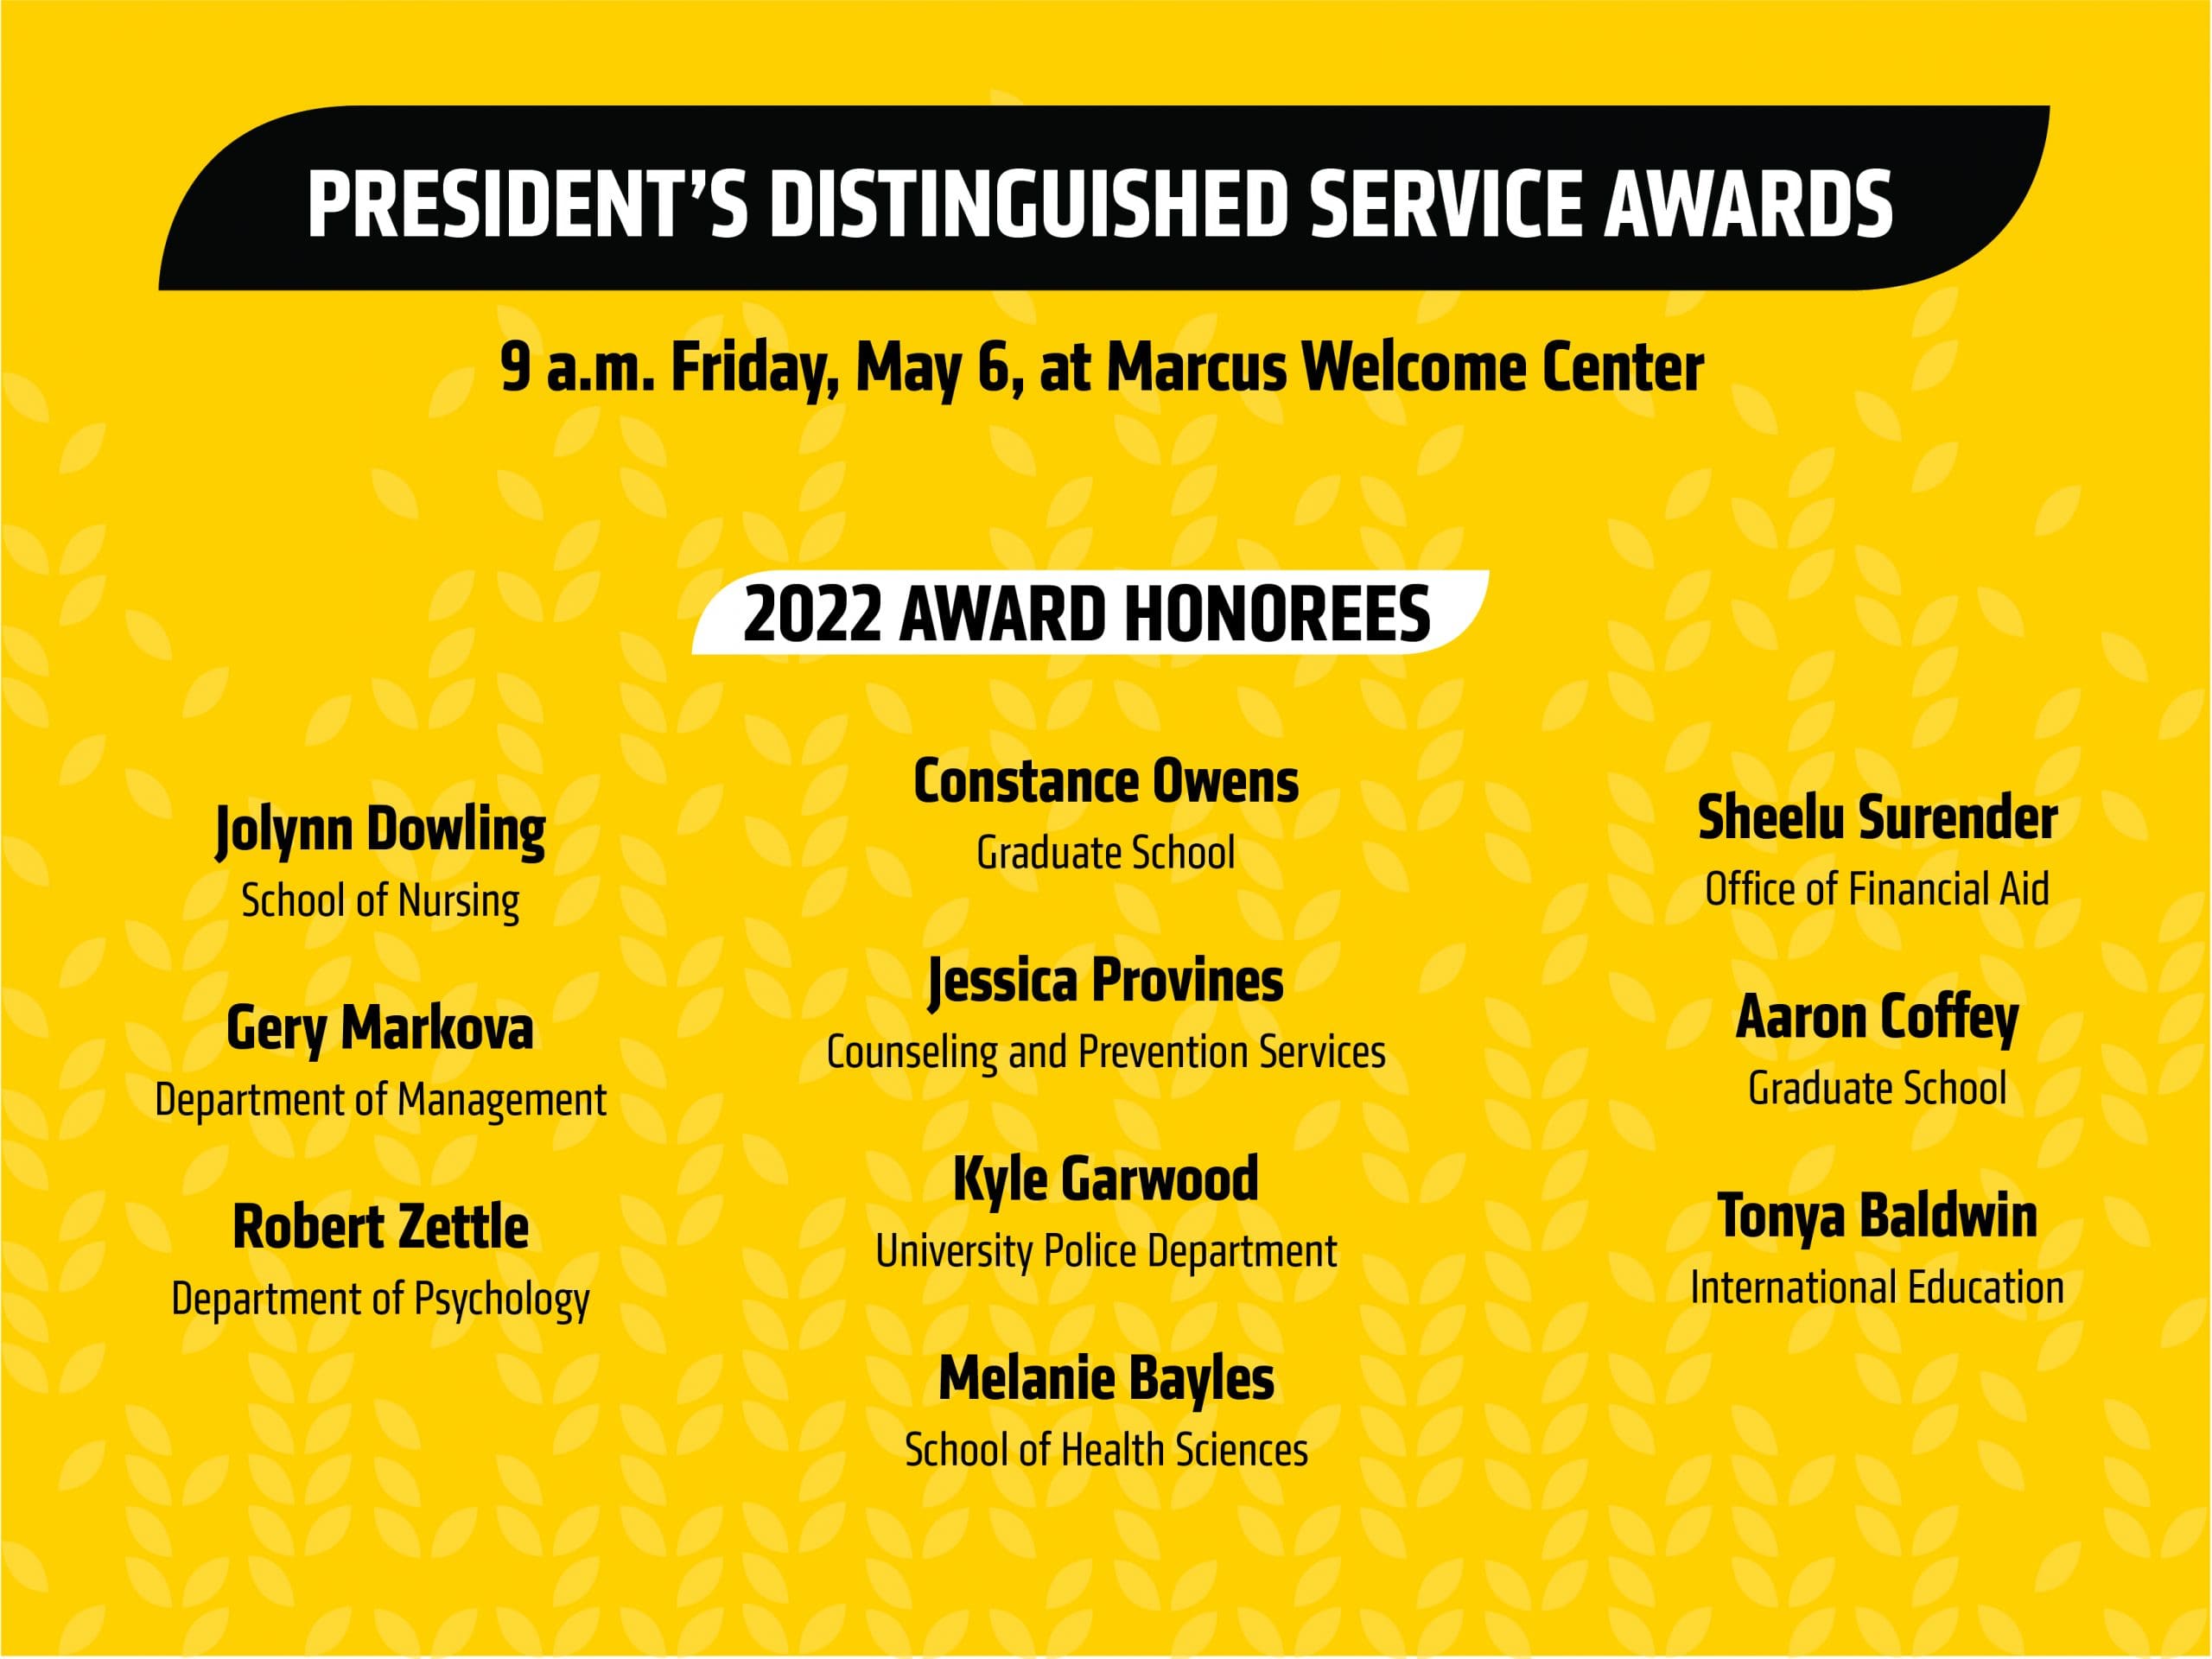 Yellow graphic image with text President’s Distinguished Service Awards 9 a.m. Friday, May 6 at Marcus Welcome Center|2022 Award Honorees Jolynn Dowling, School of Nursing| Gery Markova, Department of Management| Robert Zettle, Department of Psychology| Constance Owens, Graduate School| Jessica Provines, Counseling and Prevention Services | Kyle Garwood, University Police Department | Melanie Bayles, School of Health Science |Sheelu Surender, Office of Financial Aid | Aaron Coffey, Graduate School |Tonya Baldwin, International Education.